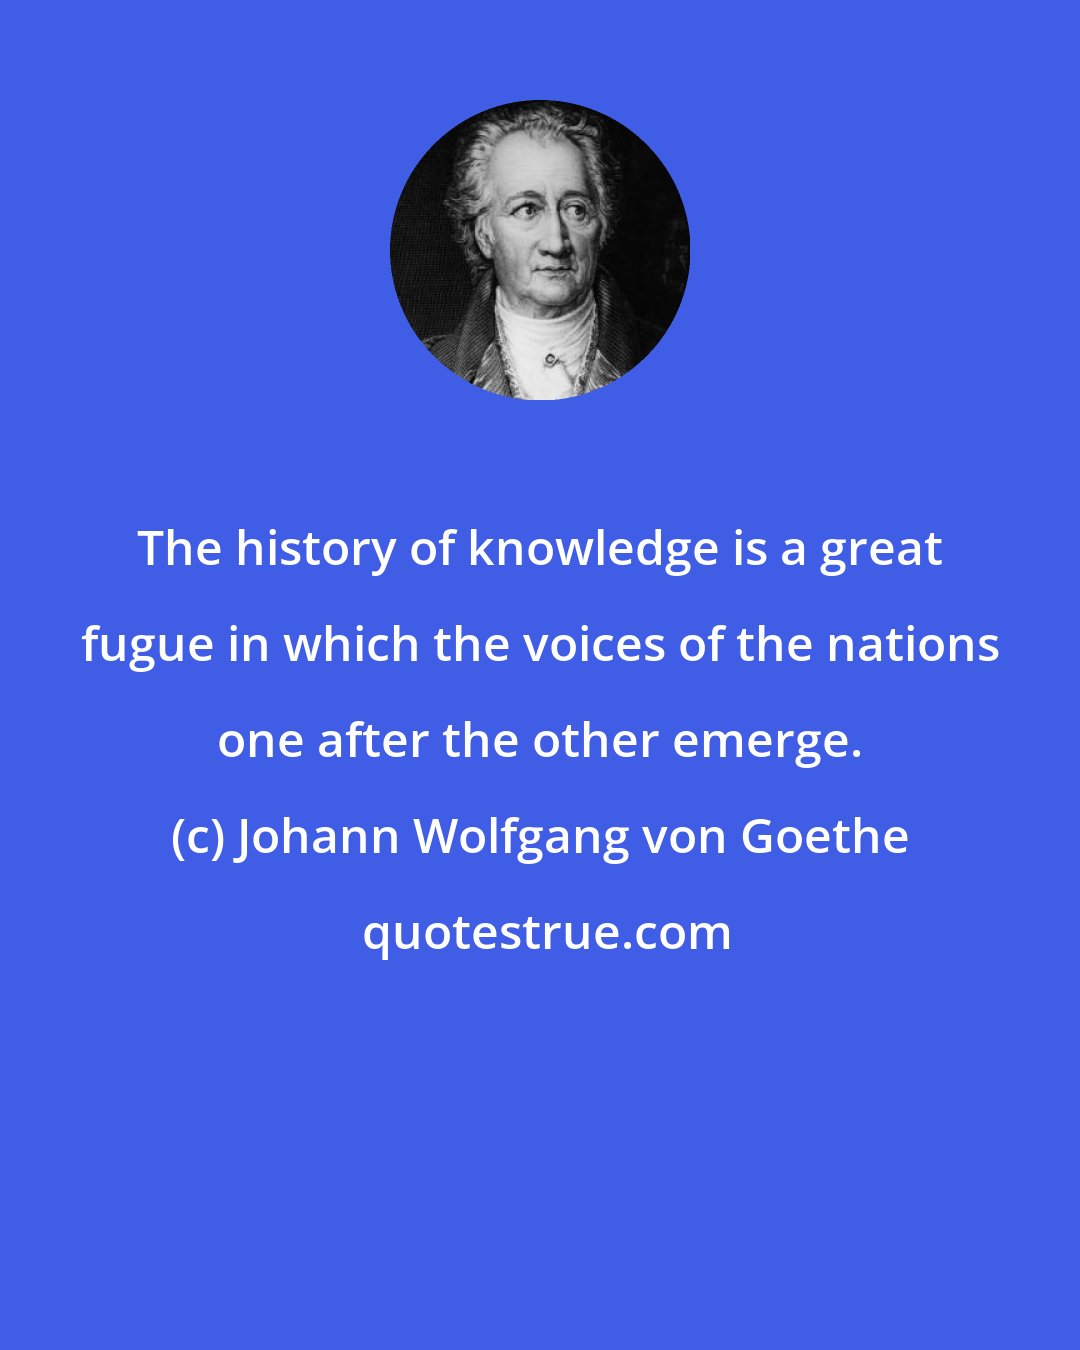 Johann Wolfgang von Goethe: The history of knowledge is a great fugue in which the voices of the nations one after the other emerge.